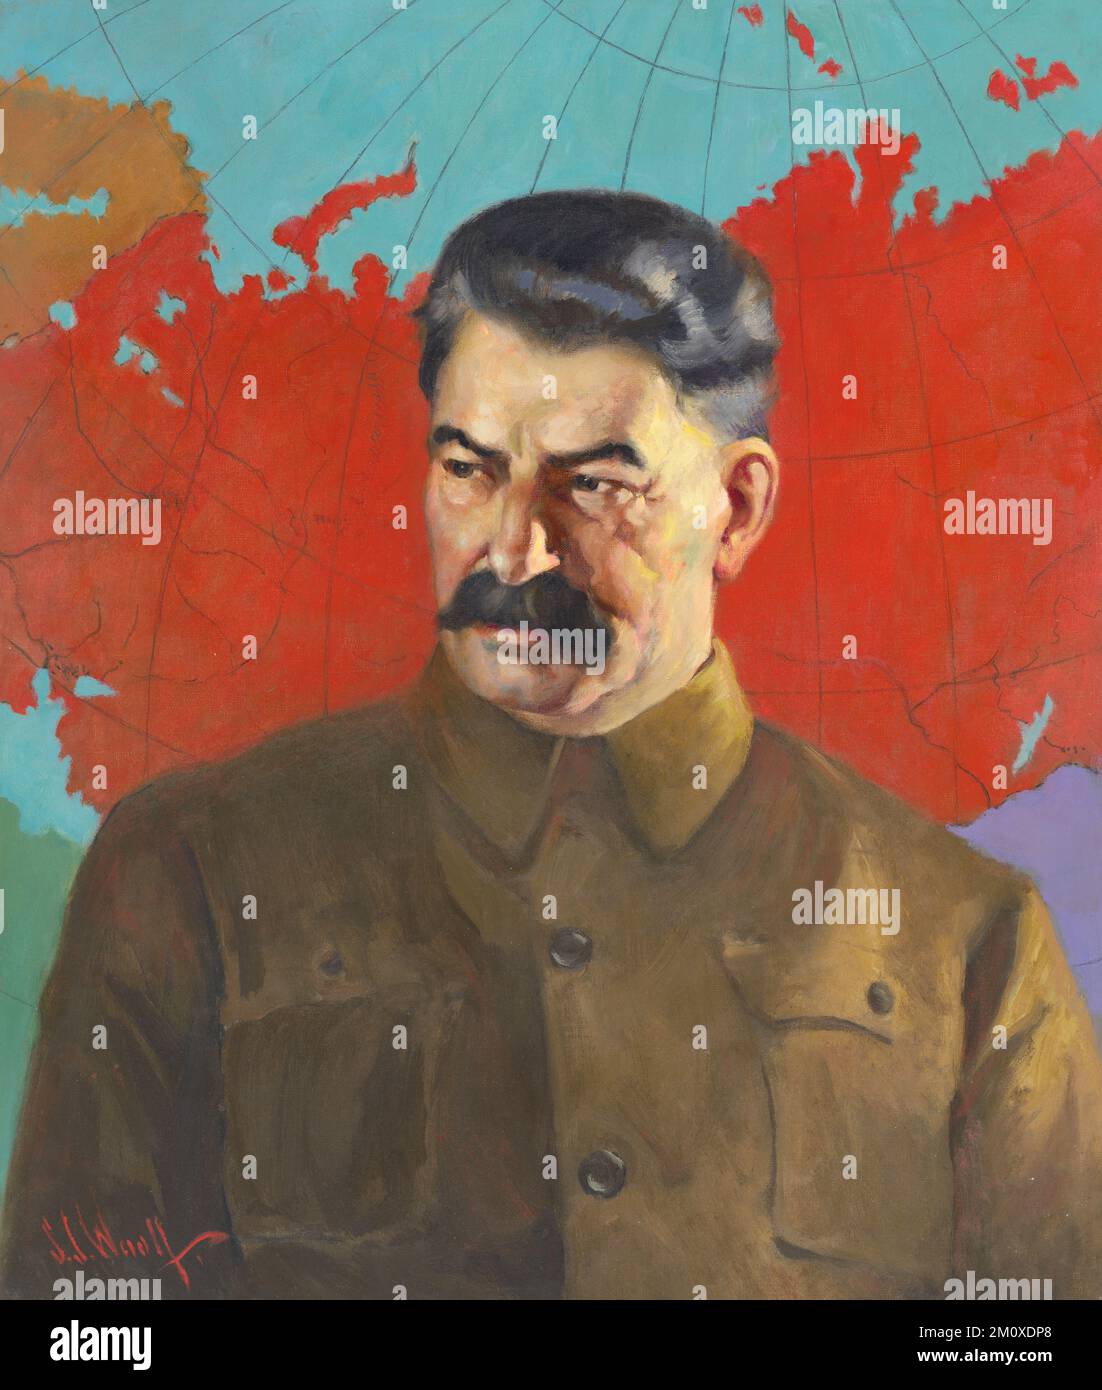 Portrait of Joseph Stalin, leader of the Soviet Union from 1924 until 1953, painting by Samuel Johnson Woolf ca. 1937. Stalin is pictured standing in front of a map of the USSR. Stock Photo